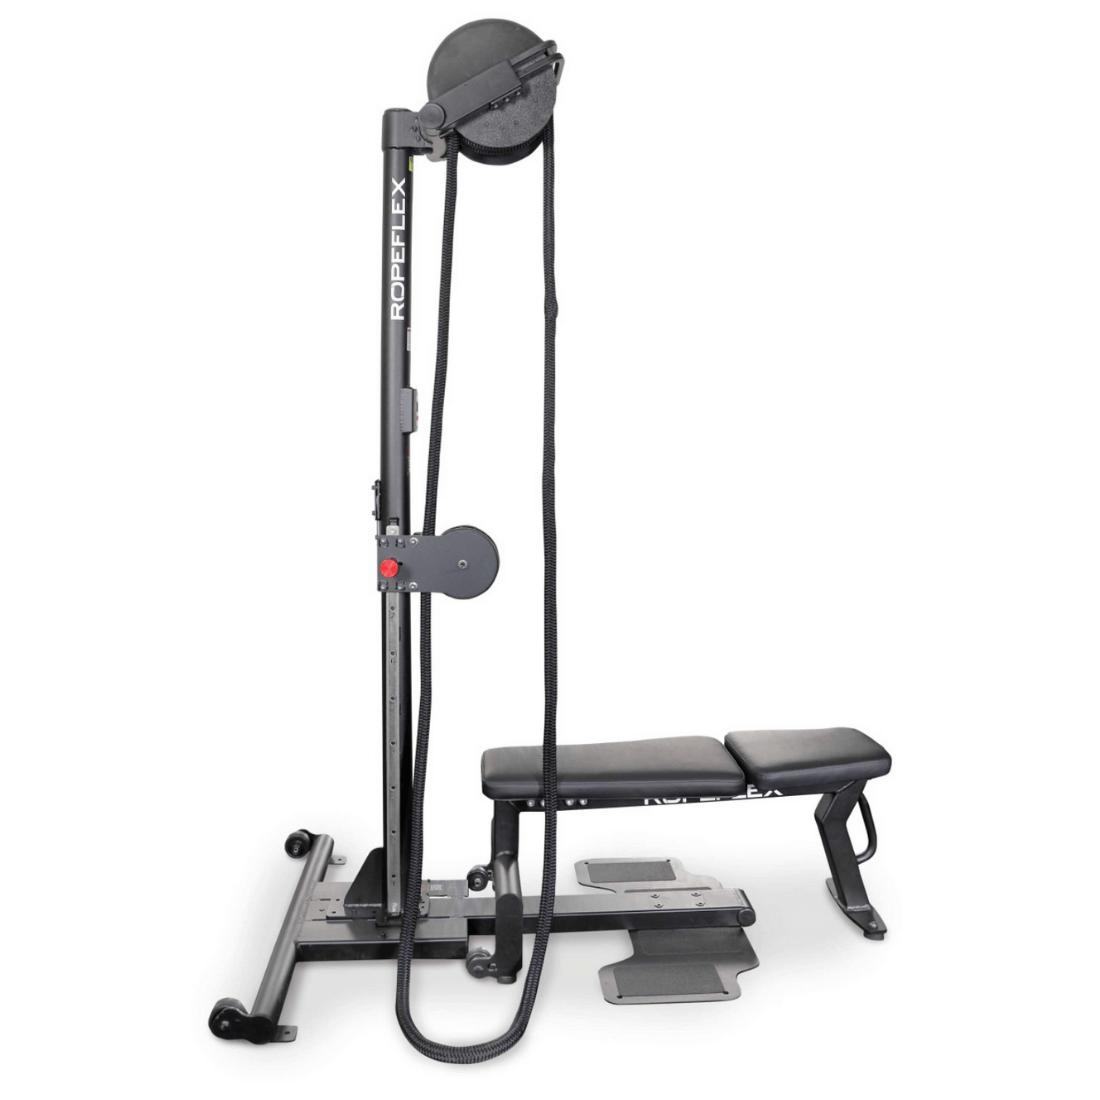 Ropeflex RX2500 Oryx Rope Pull Machine with Bench